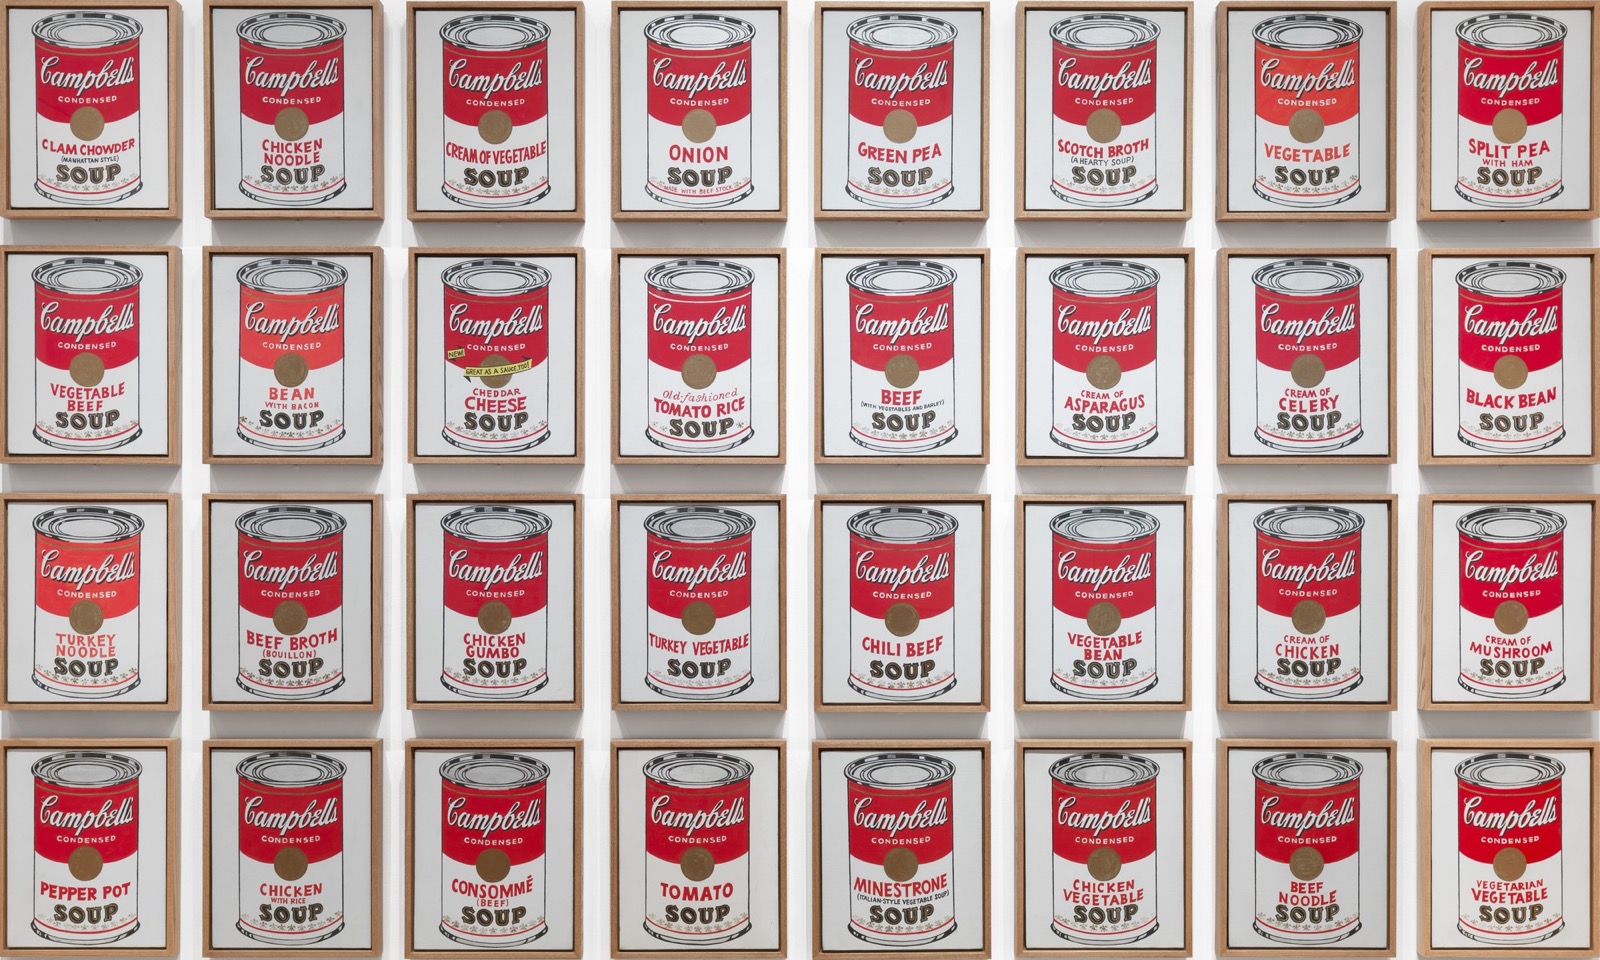 Can You Match These Famous Paintings to Their Legendary Creators? Andy Warhol's Campbell's Soup Cans